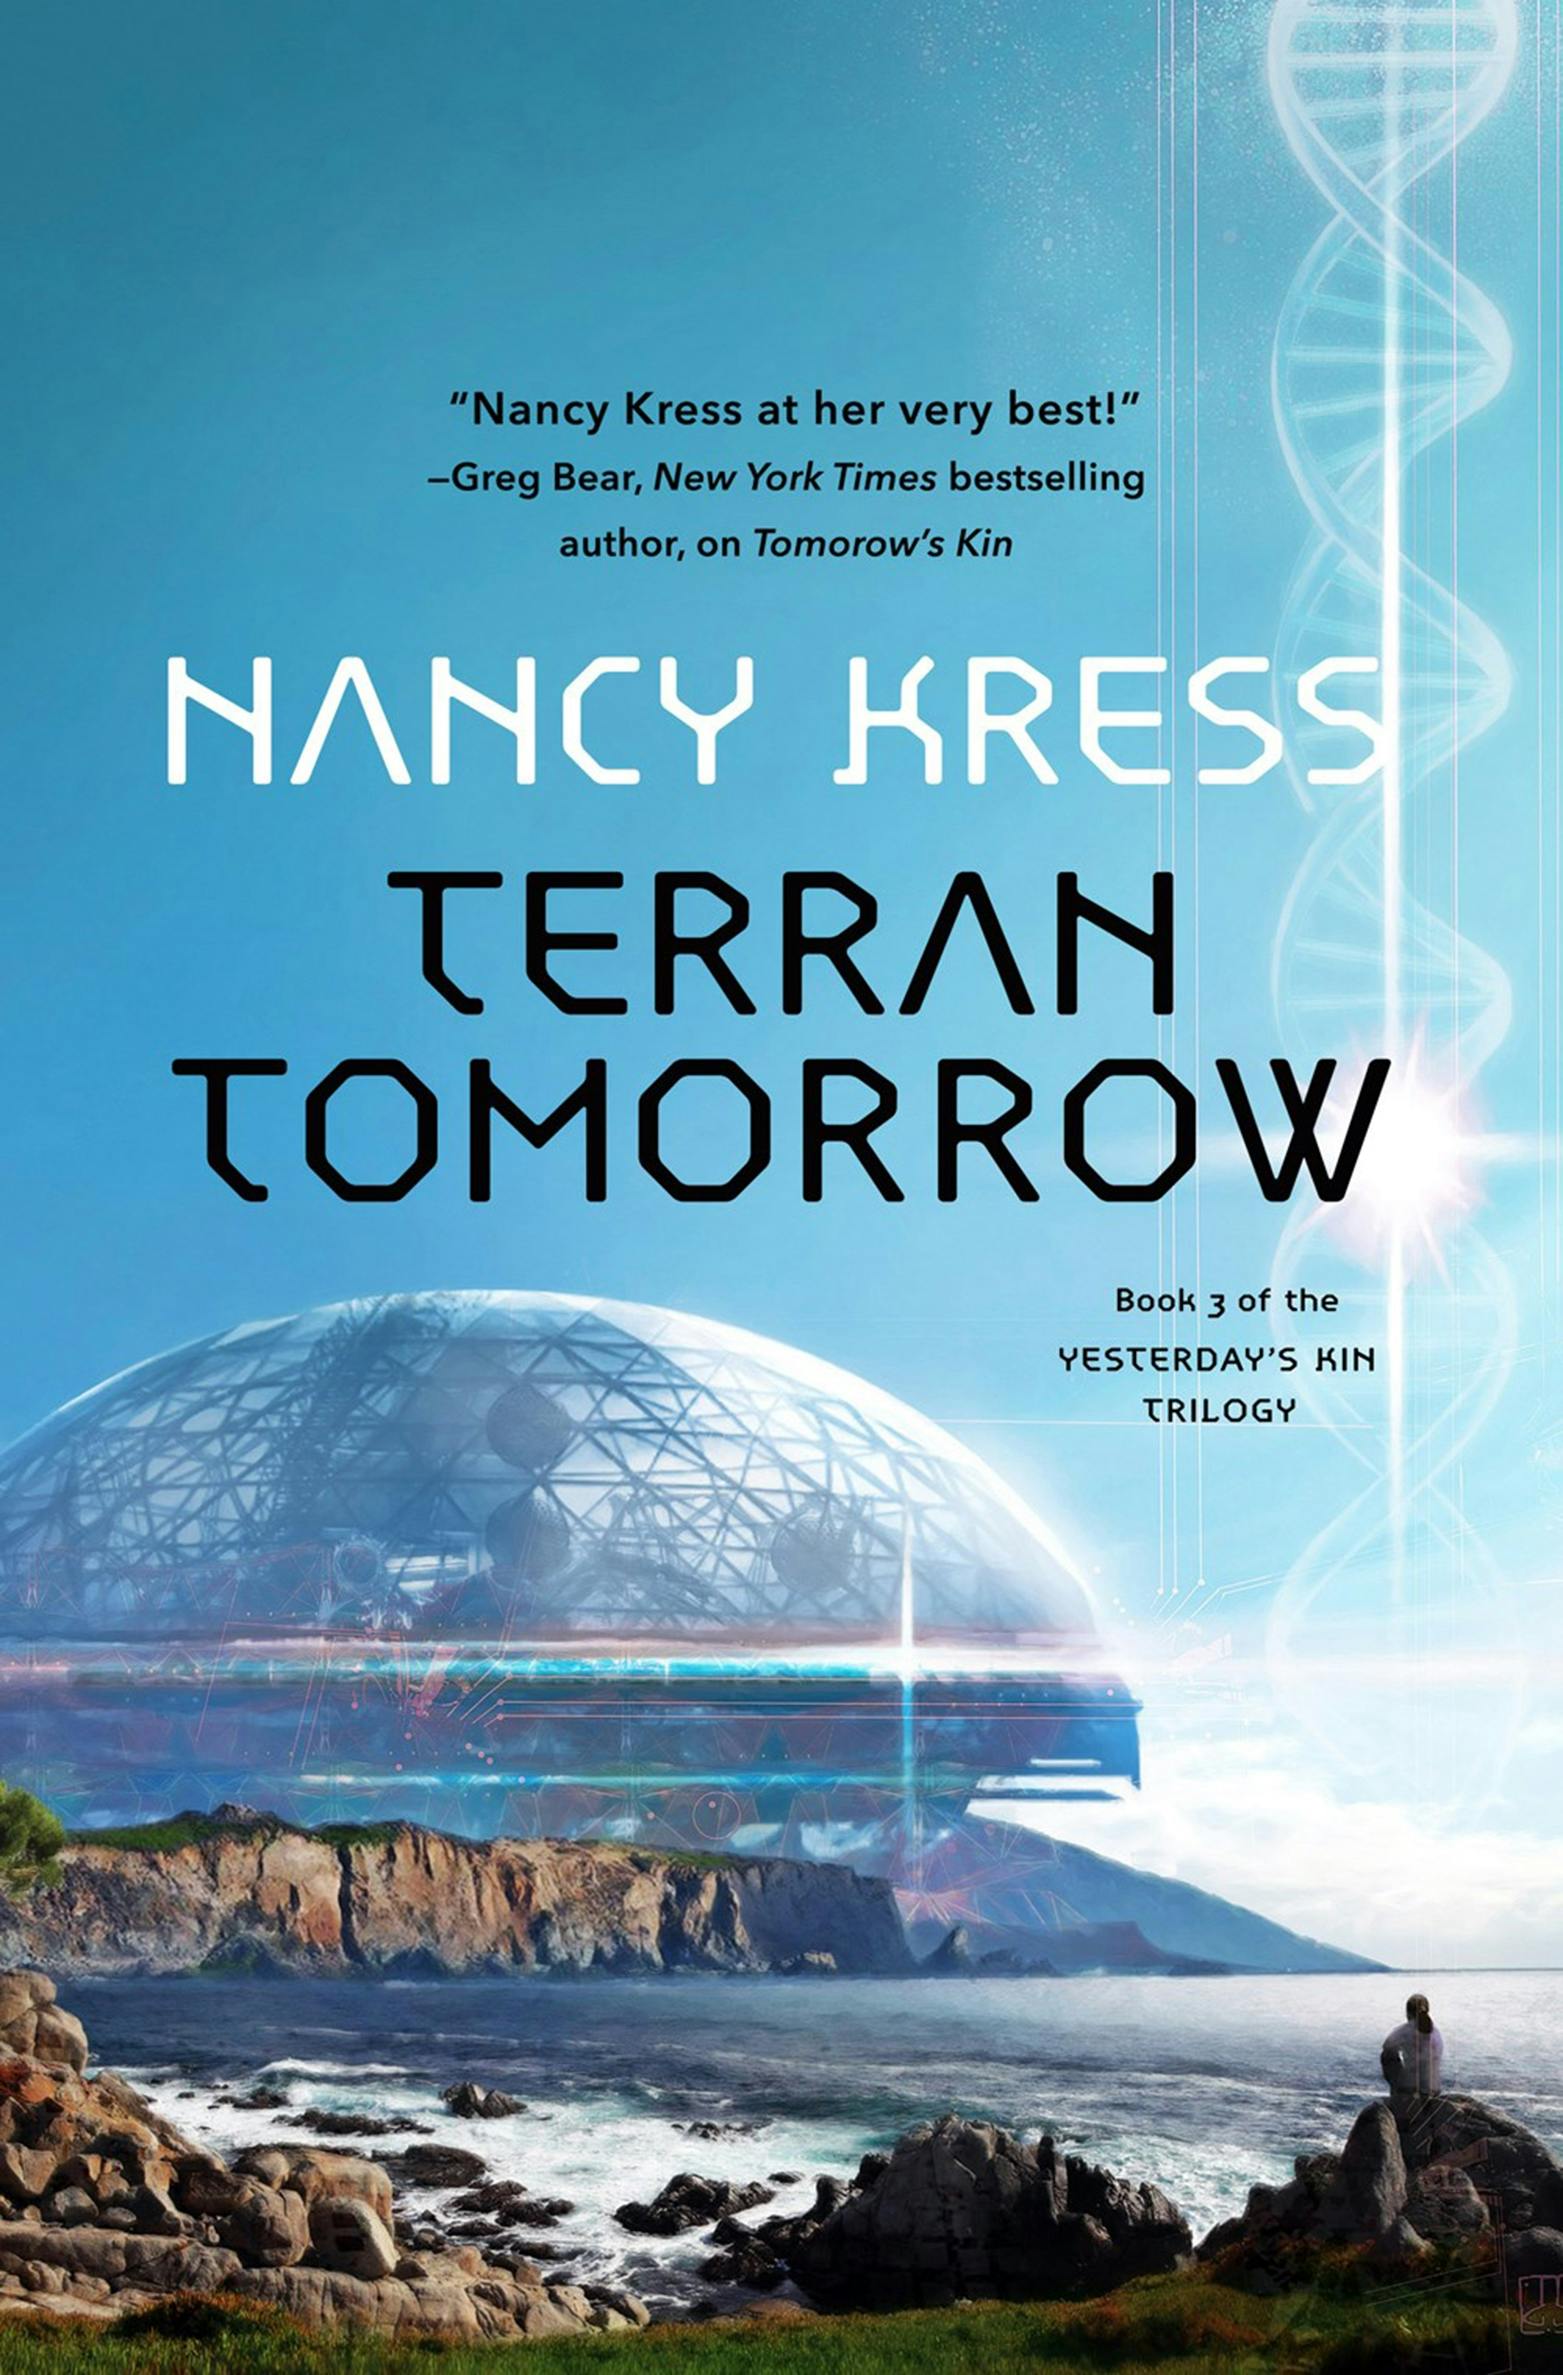 Cover for the book titled as: Terran Tomorrow